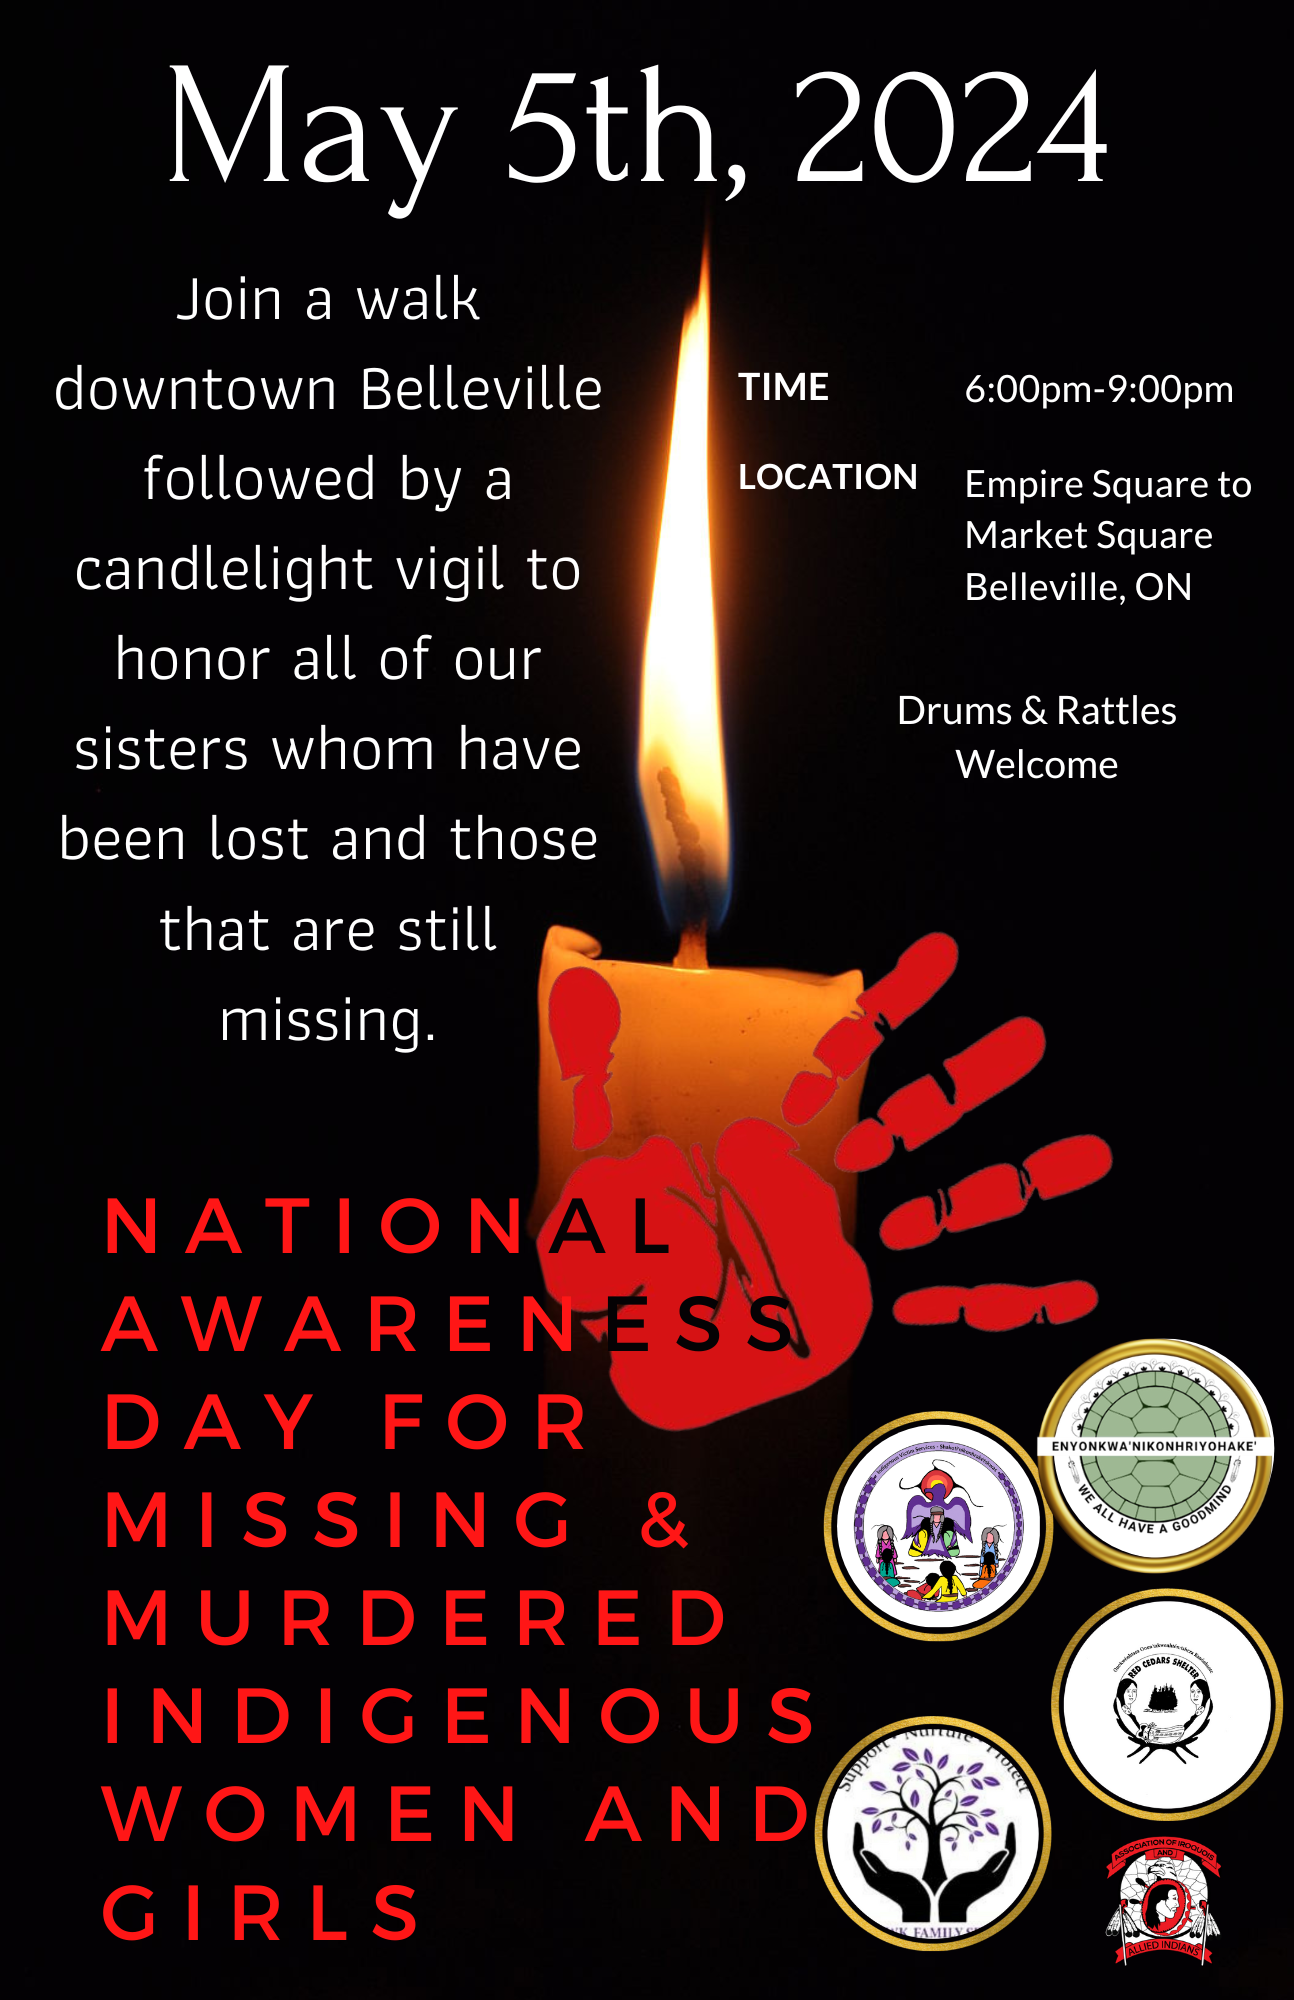 event poster with photo of candle and event details.